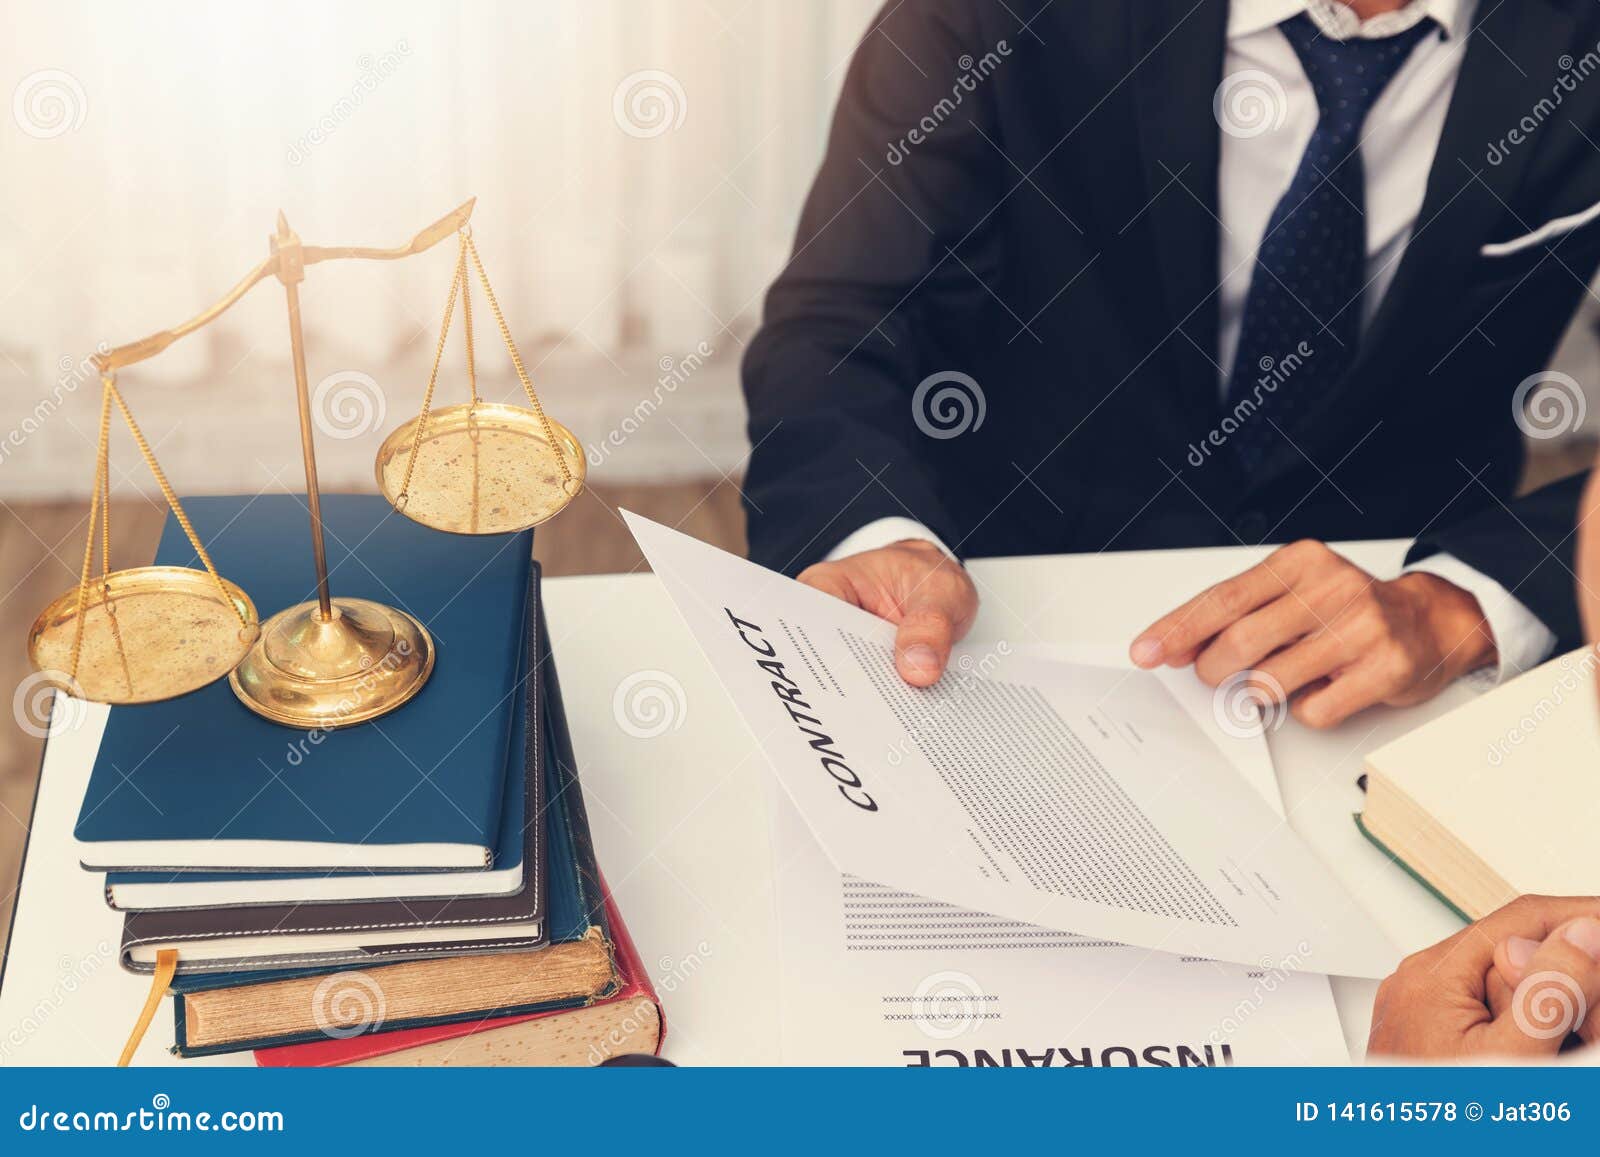 business and contract law